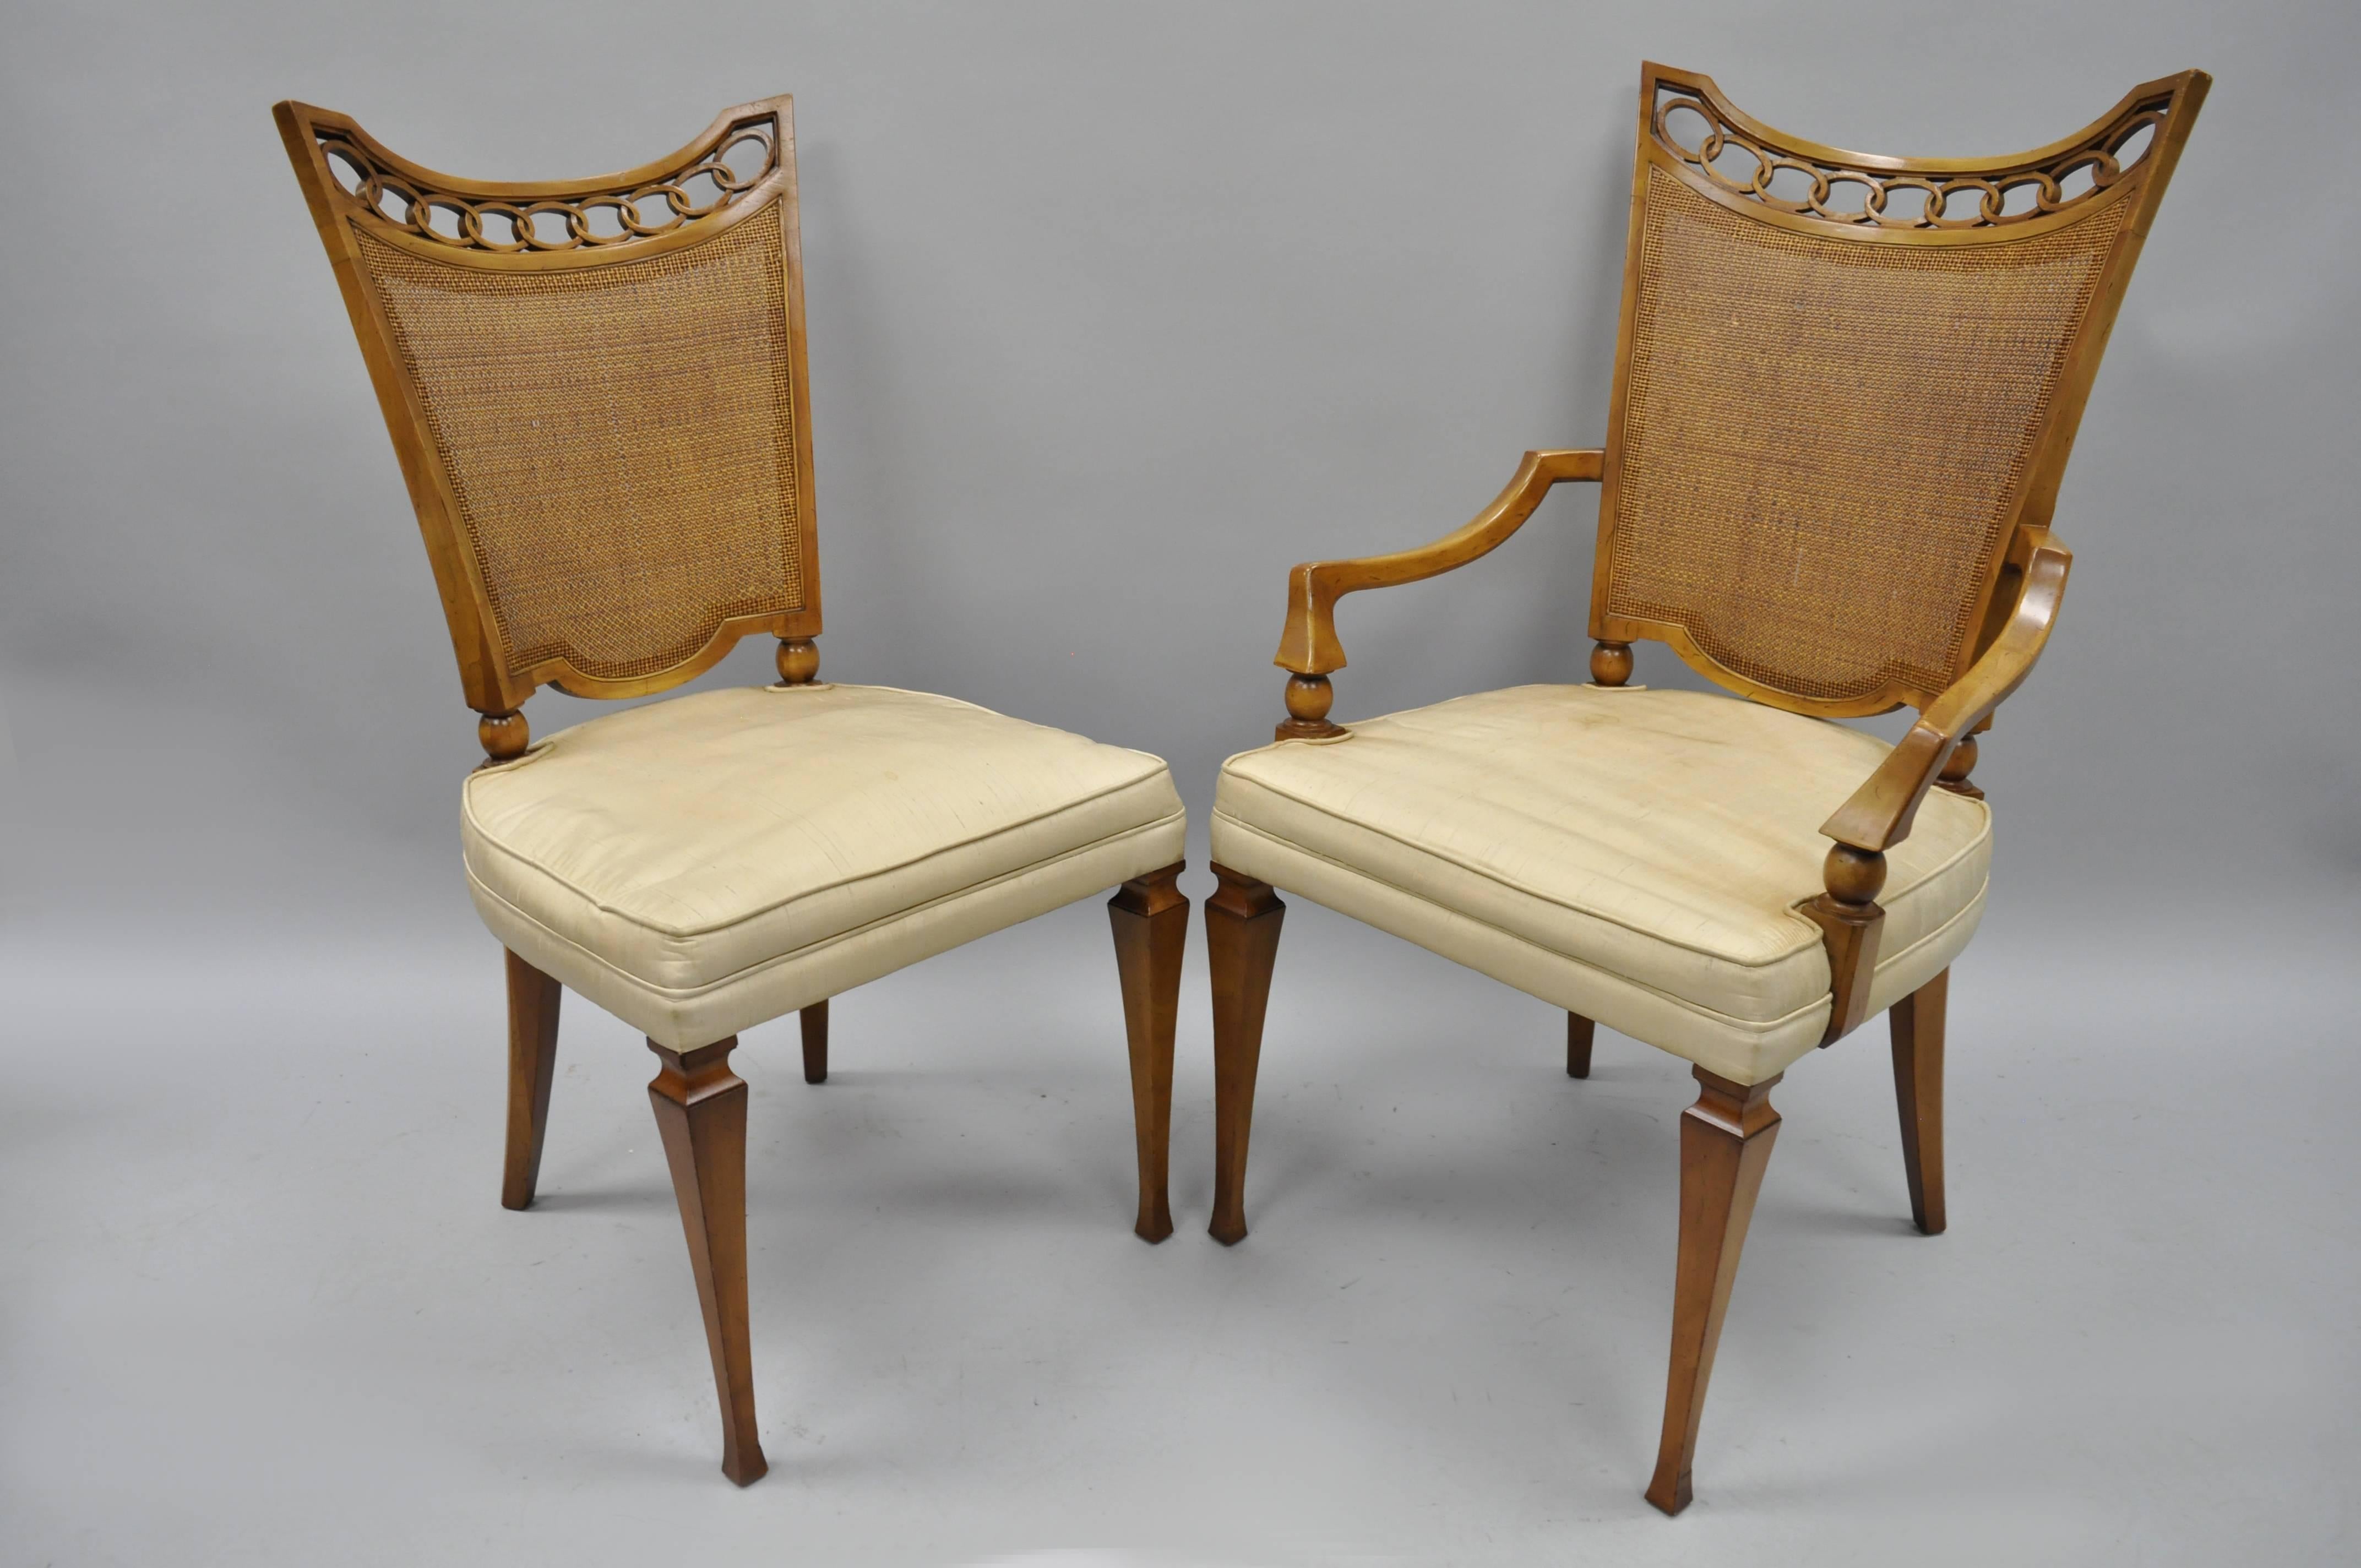 Set of six walnut John Widdicomb Hollywood Regency French style cane back dining chairs. Set features open carved top rails, quality American craftsmanship, cane backs, and sleek tapered legs. Set includes two armchairs and four side